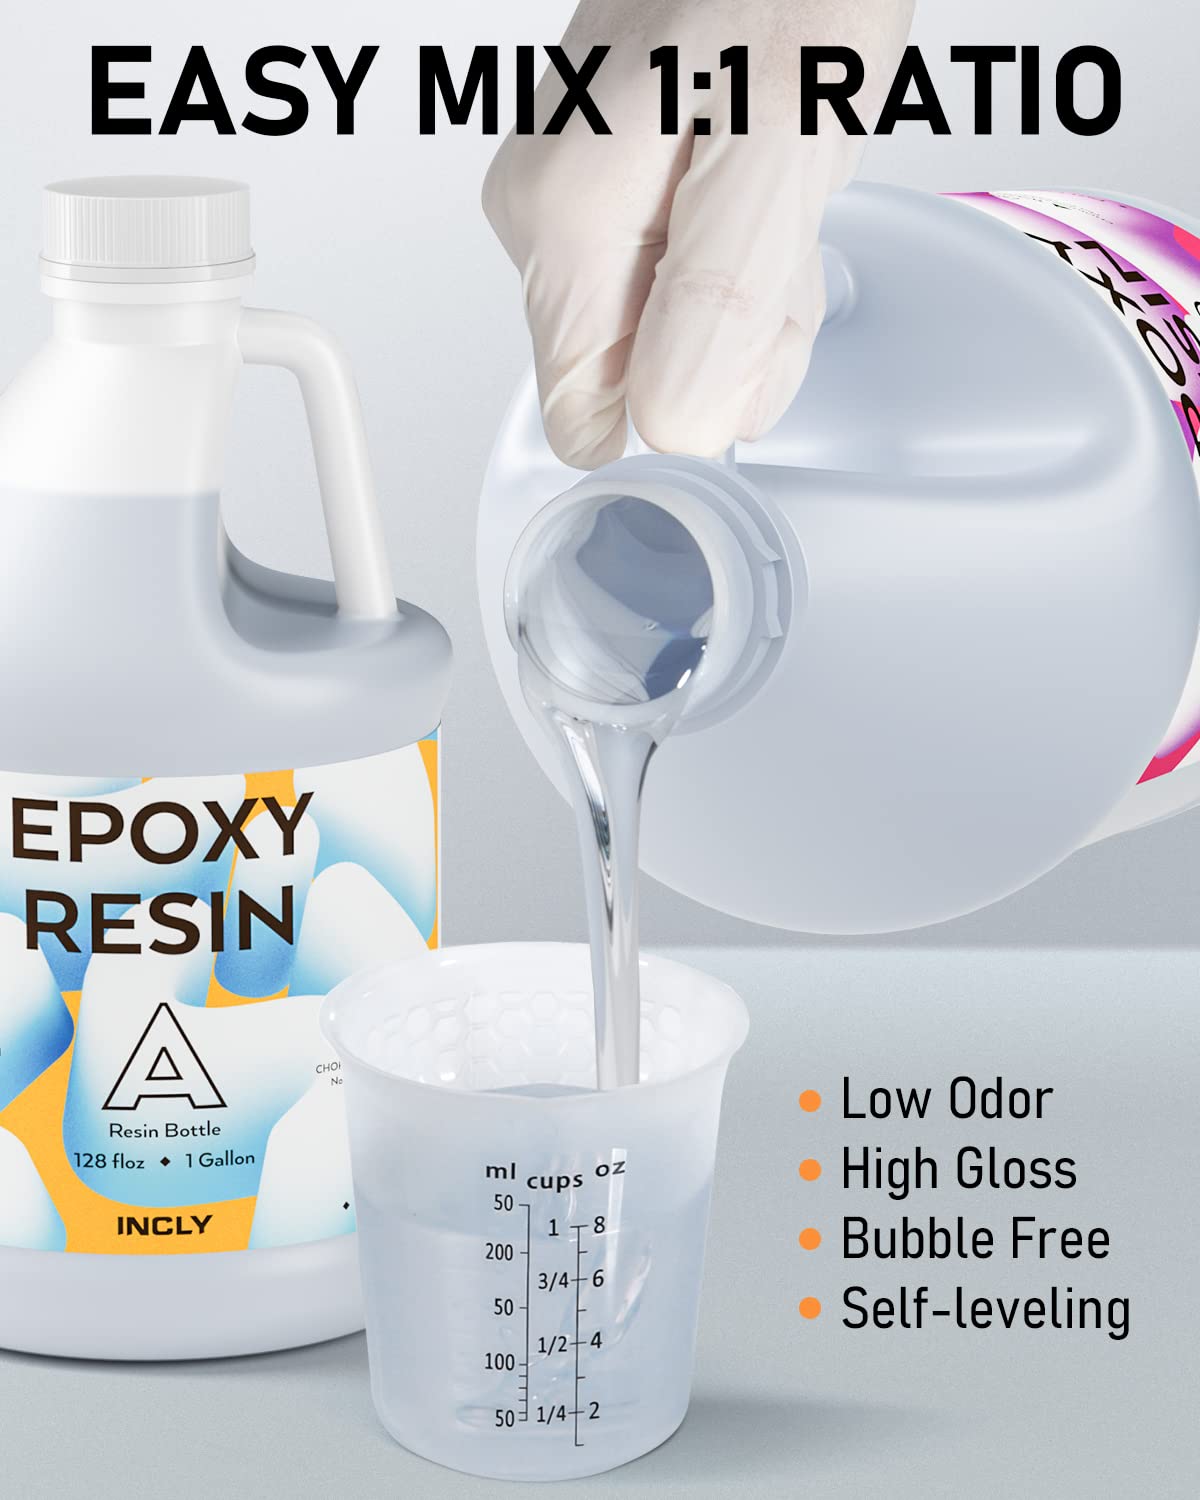 INCLY 4 Gallon Crystal Clear Epoxy Resin Kit, High Gloss & Bubbles Free Resin Supplies Coating & Casting Resin for Table Top, Countertop, River